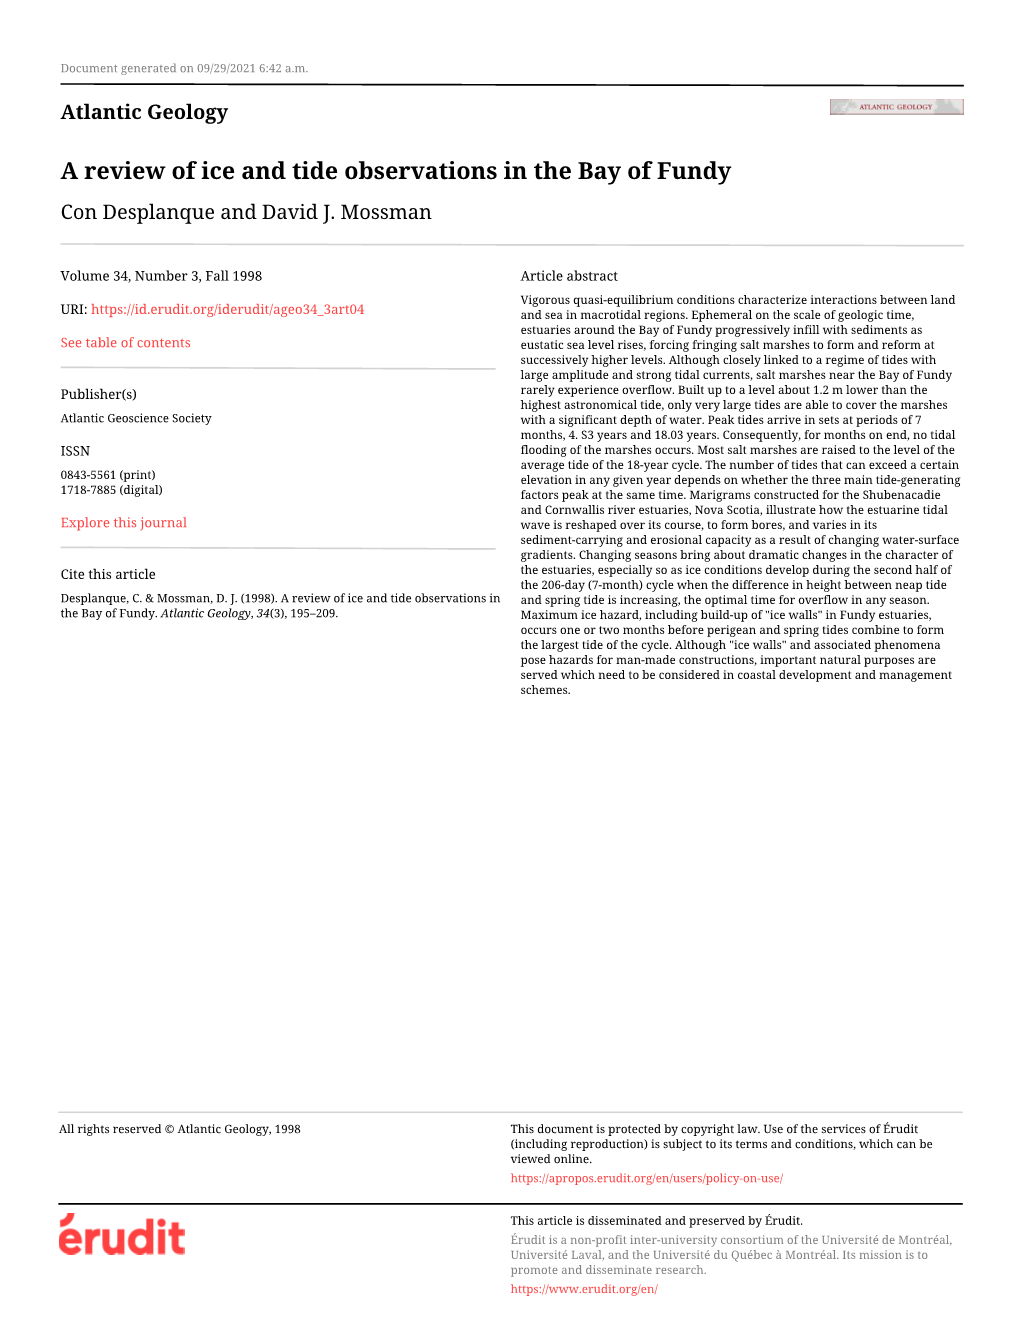 A Review of Ice and Tide Observations in the Bay of Fundy Con Desplanque and David J